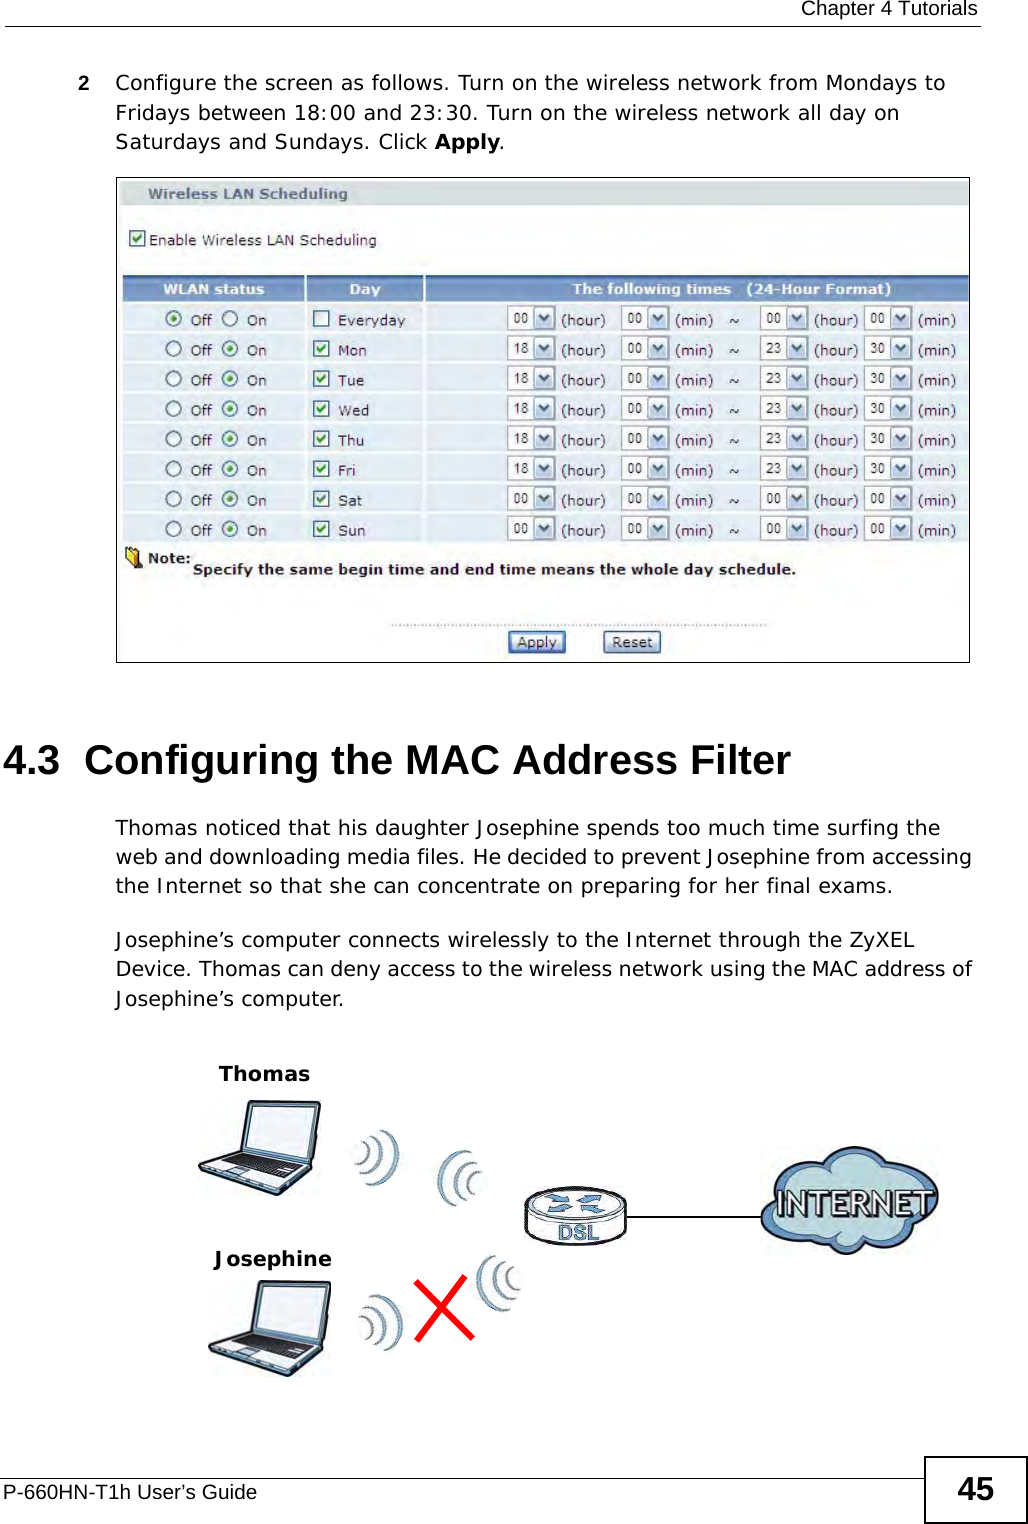  Chapter 4 TutorialsP-660HN-T1h User’s Guide 452Configure the screen as follows. Turn on the wireless network from Mondays to Fridays between 18:00 and 23:30. Turn on the wireless network all day on Saturdays and Sundays. Click Apply.4.3  Configuring the MAC Address FilterThomas noticed that his daughter Josephine spends too much time surfing the web and downloading media files. He decided to prevent Josephine from accessing the Internet so that she can concentrate on preparing for her final exams.Josephine’s computer connects wirelessly to the Internet through the ZyXEL Device. Thomas can deny access to the wireless network using the MAC address of Josephine’s computer.ThomasJosephine